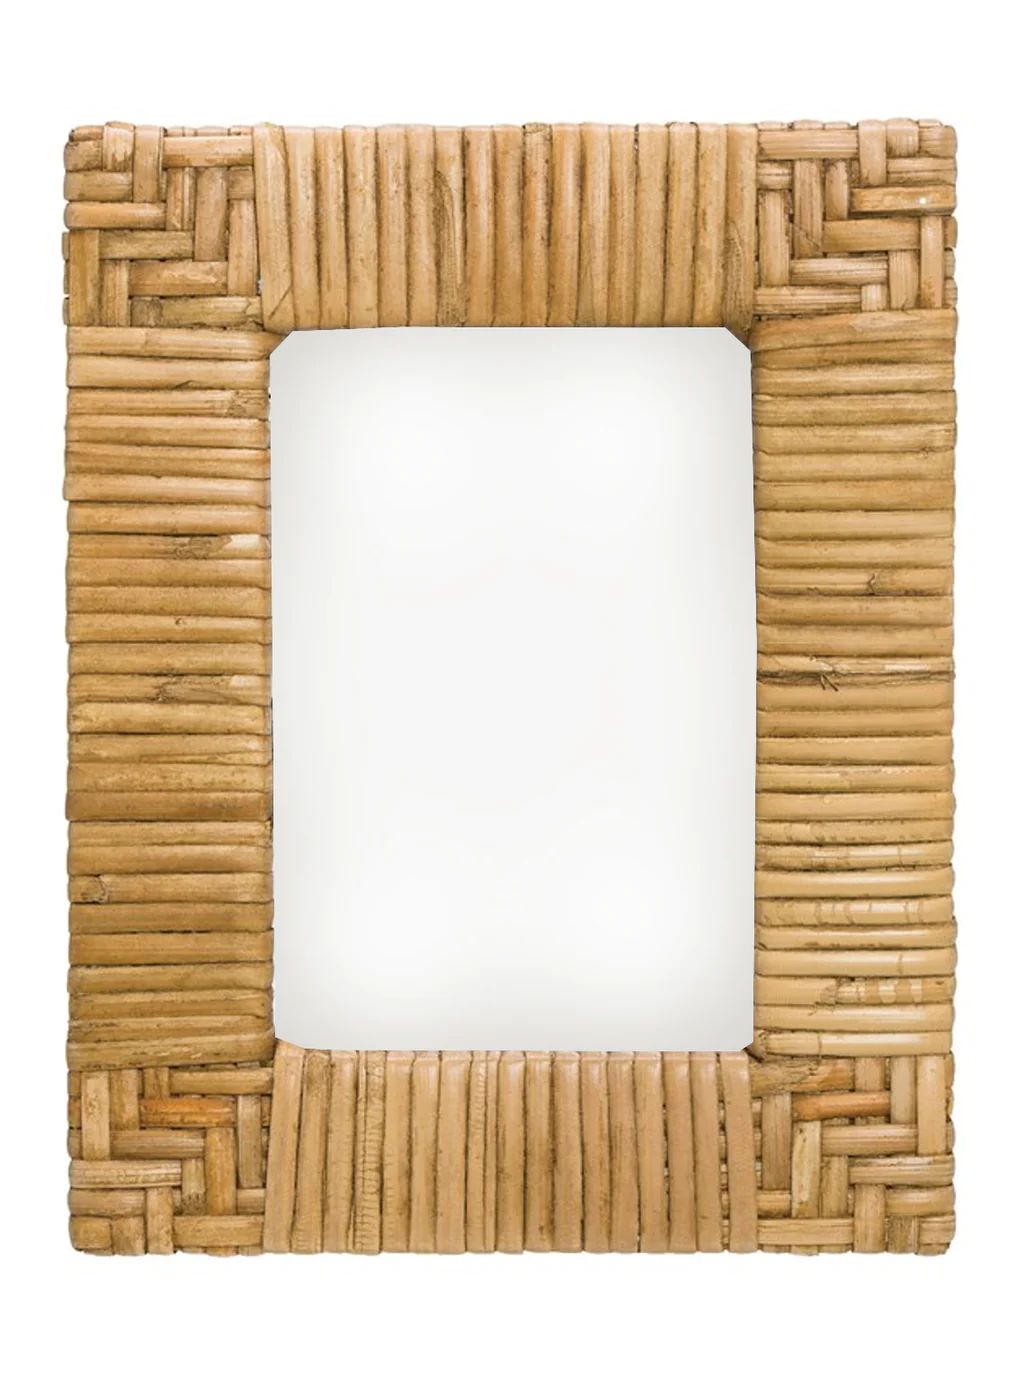 Woven Rattan Frame | House of Jade Home